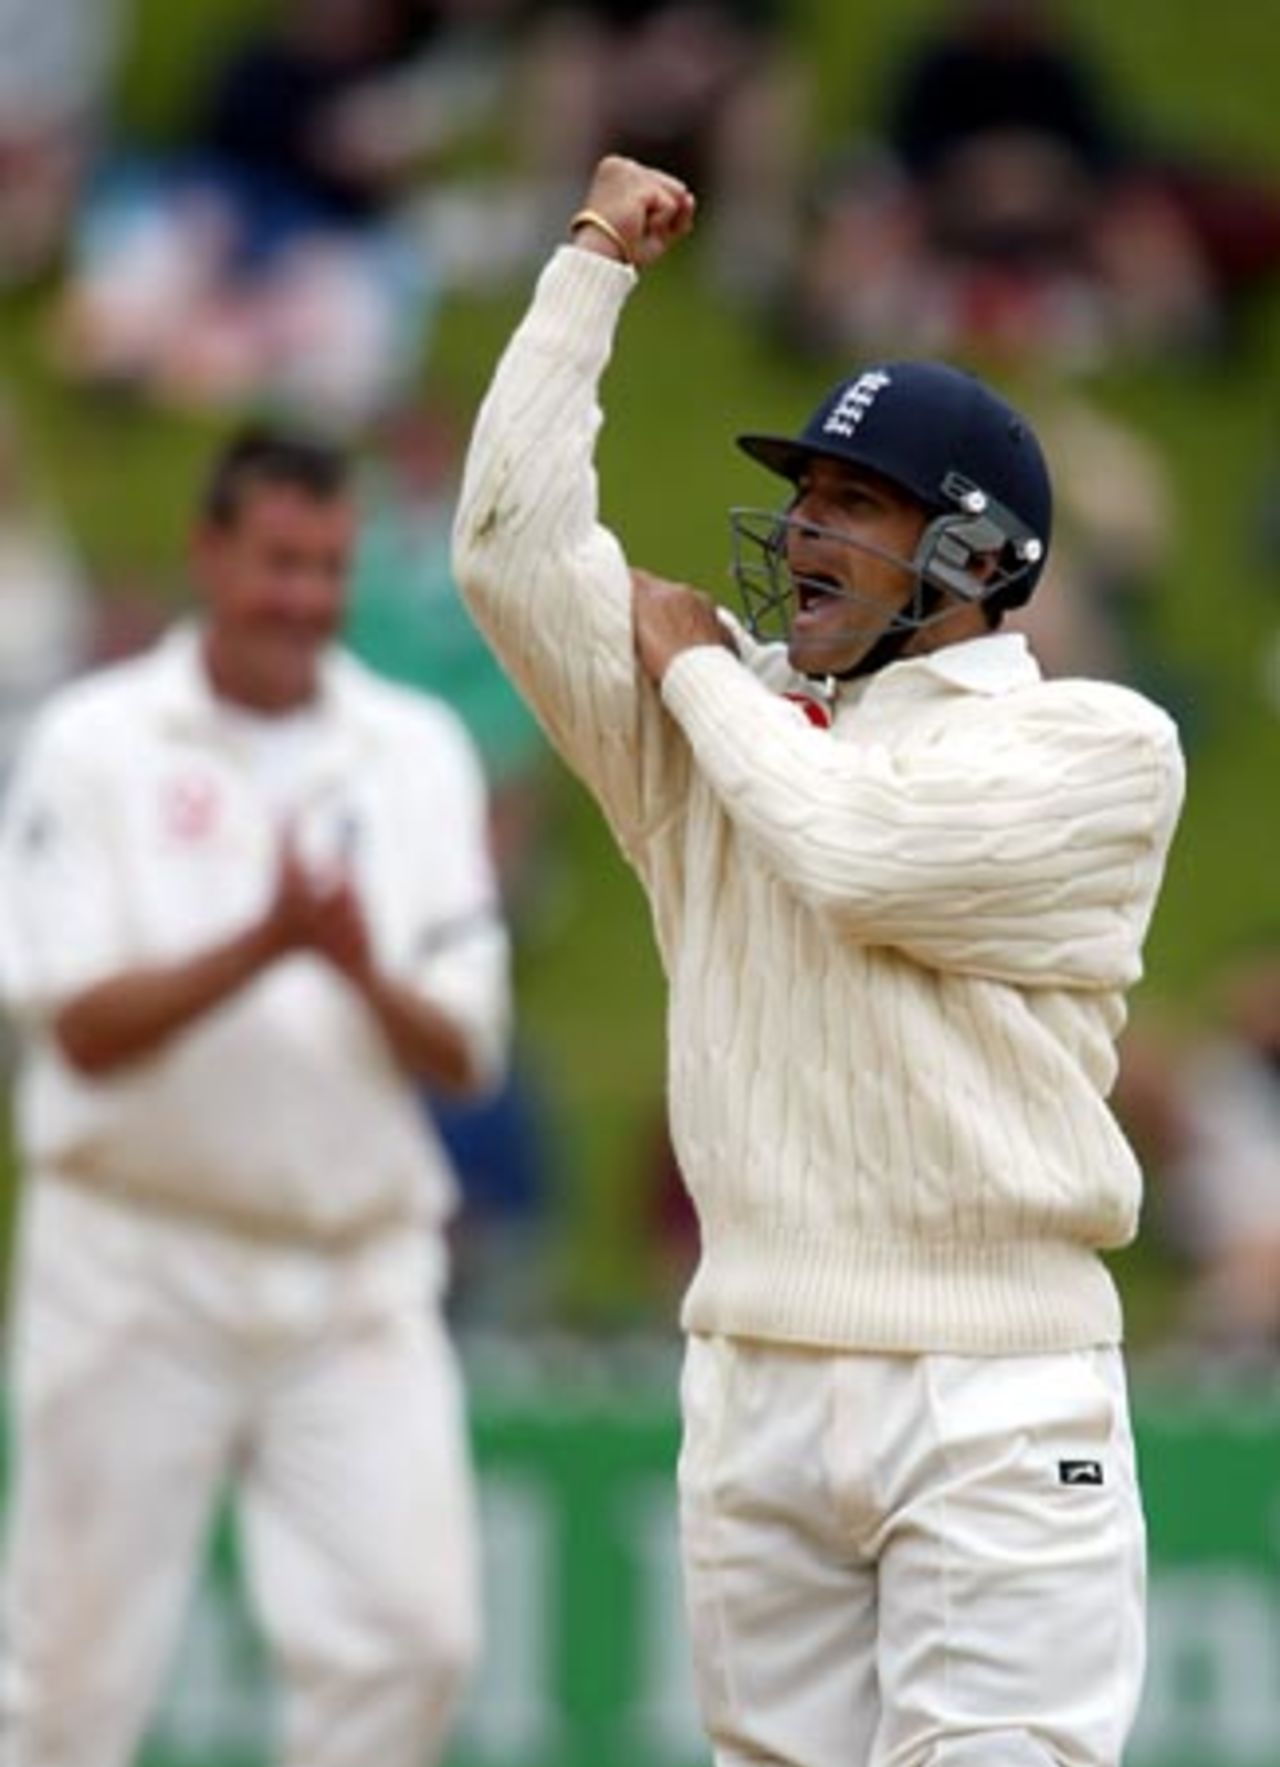 England fielder Mark Ramprakash gestures to the crowd after fielding a delivery from the bowling of Ashley Giles. 2nd Test: New Zealand v England at Basin Reserve, Wellington, 21-25 March 2002 (25 March 2002).